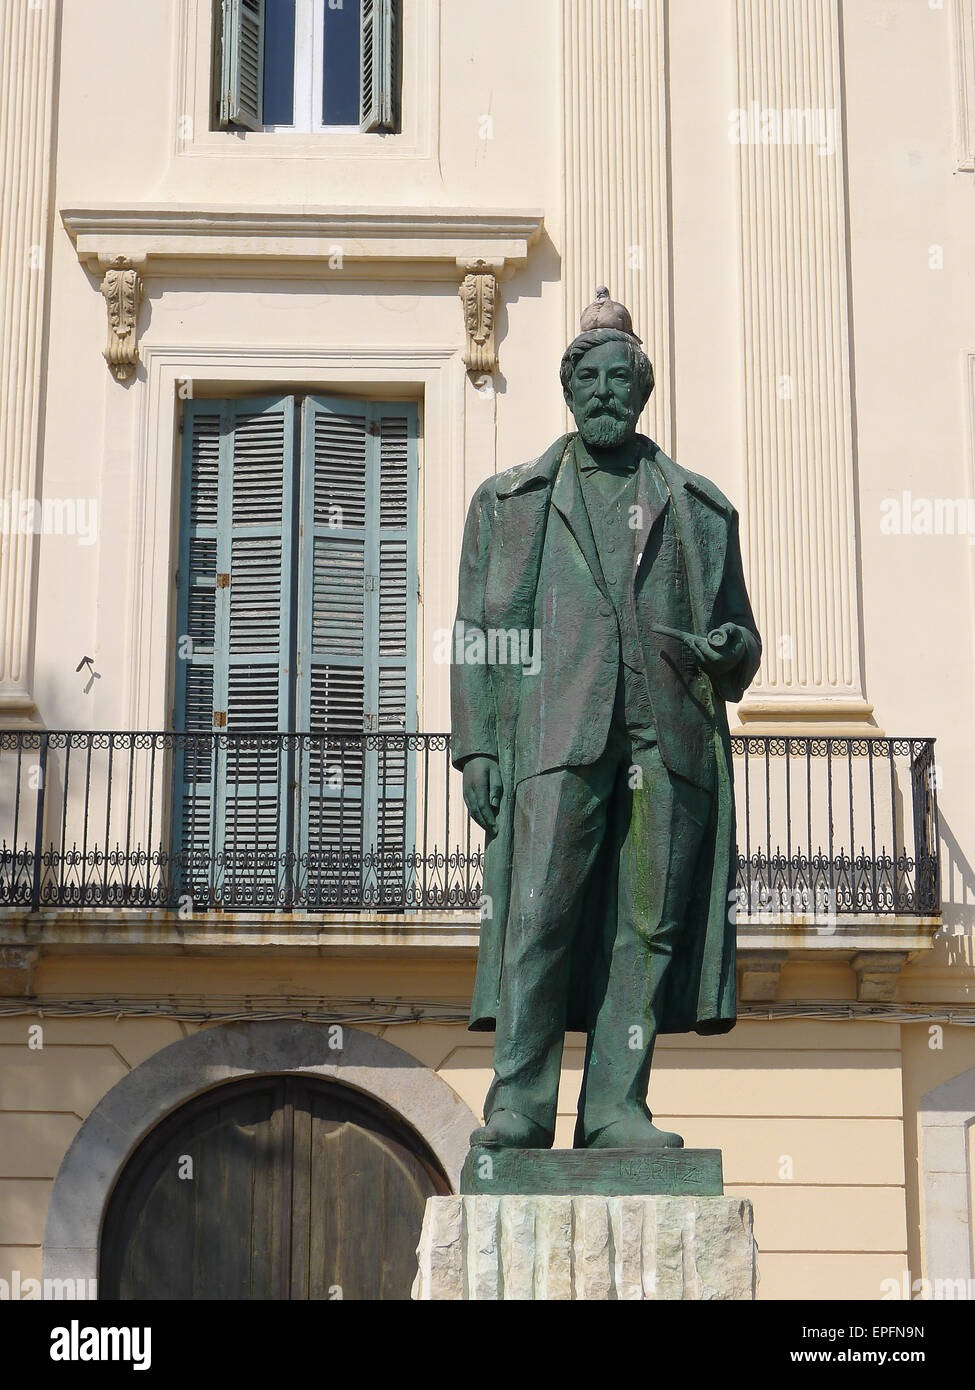 Statue of Catalan artist Santiago Rusiñol with pigeon on head in town of Sitges, Catalonia, Spain Stock Photo